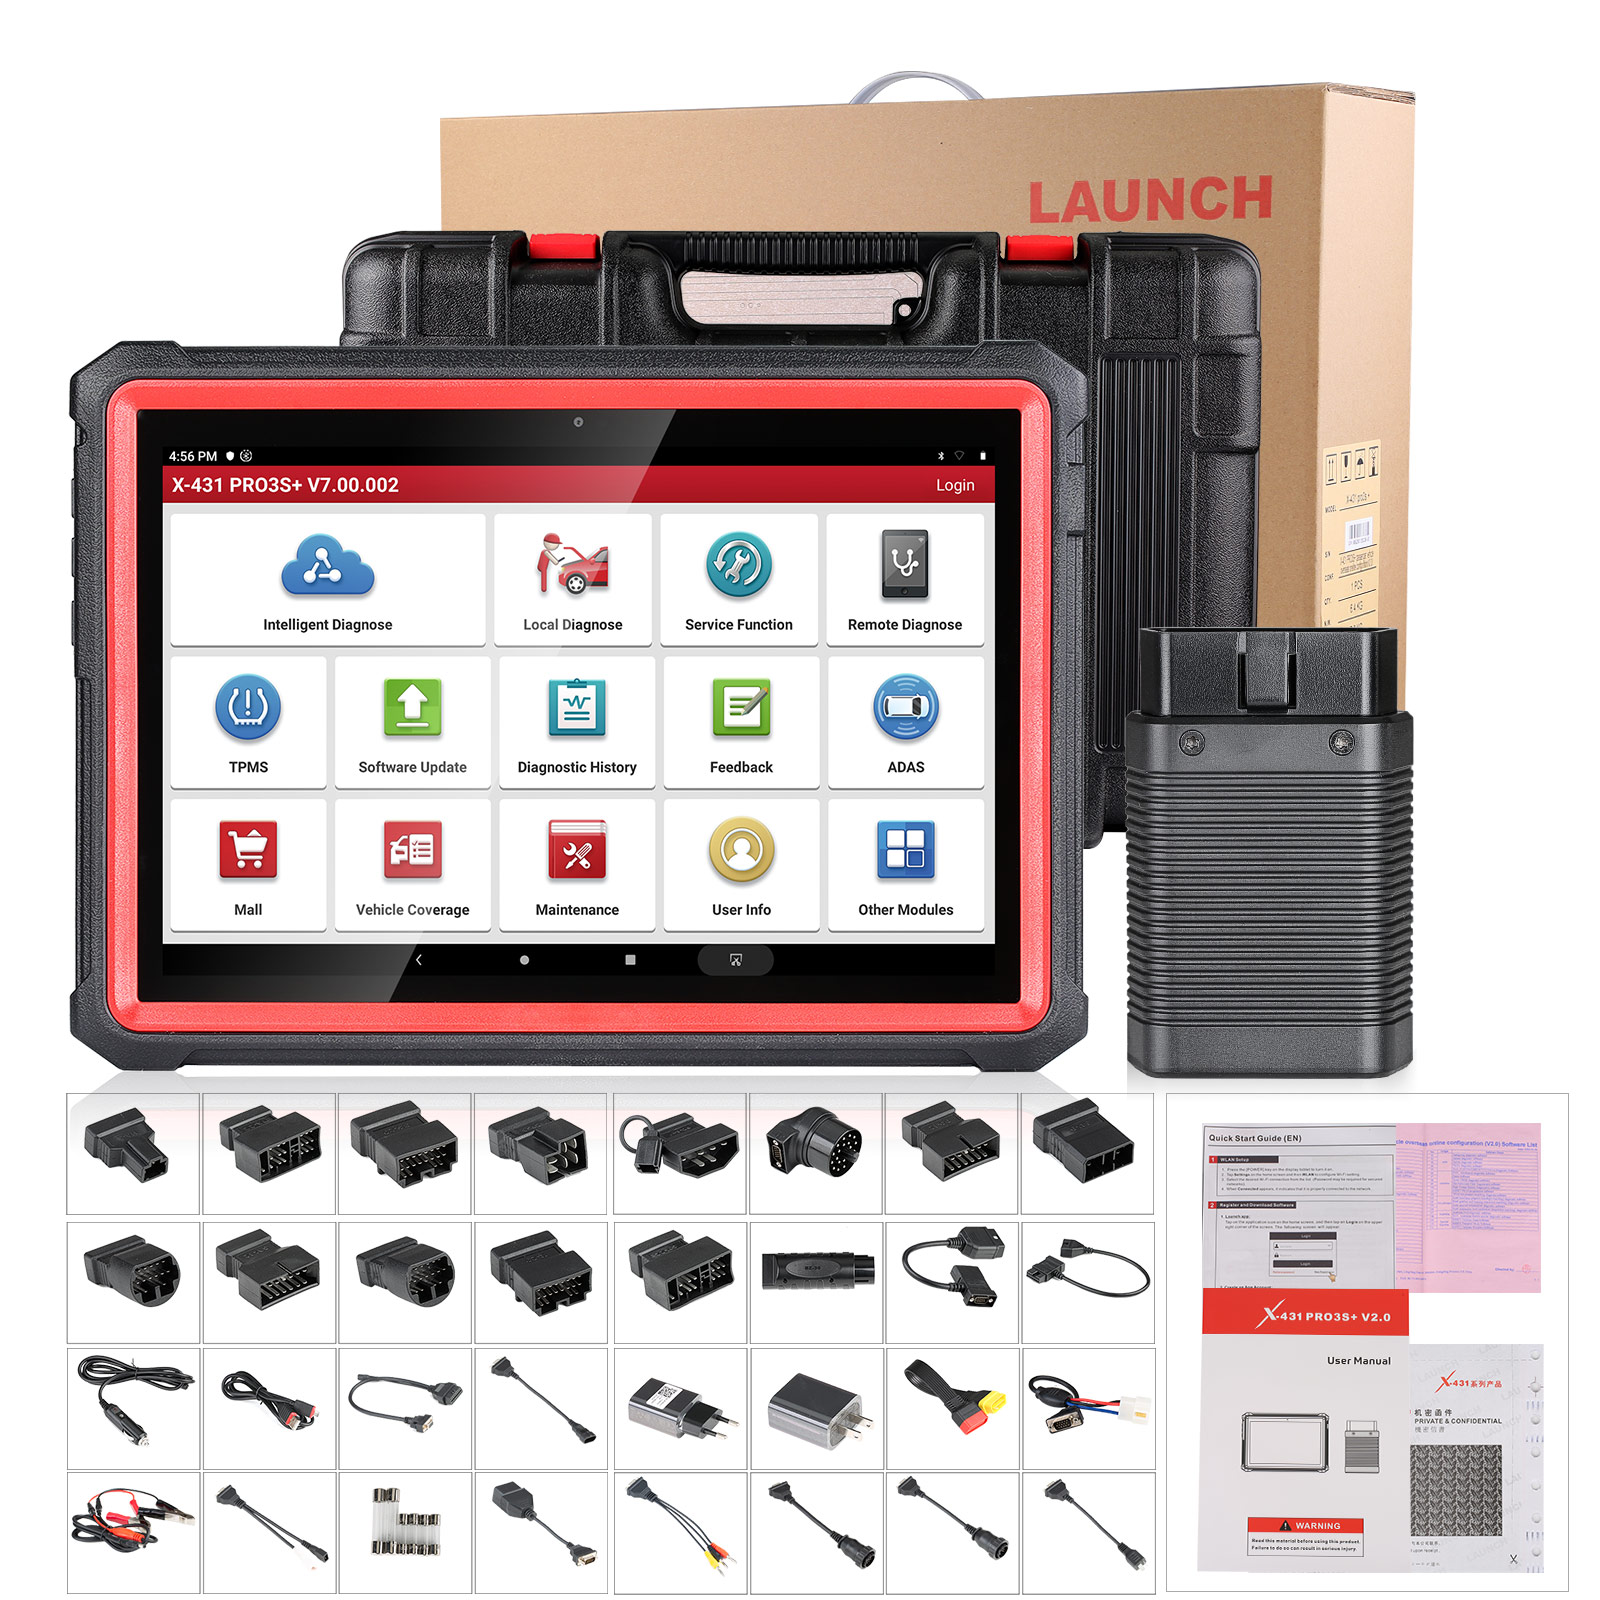 LAUNCH X431 PRO3S+ 10.1 Diagnostic Tool Supports Topology Mapping